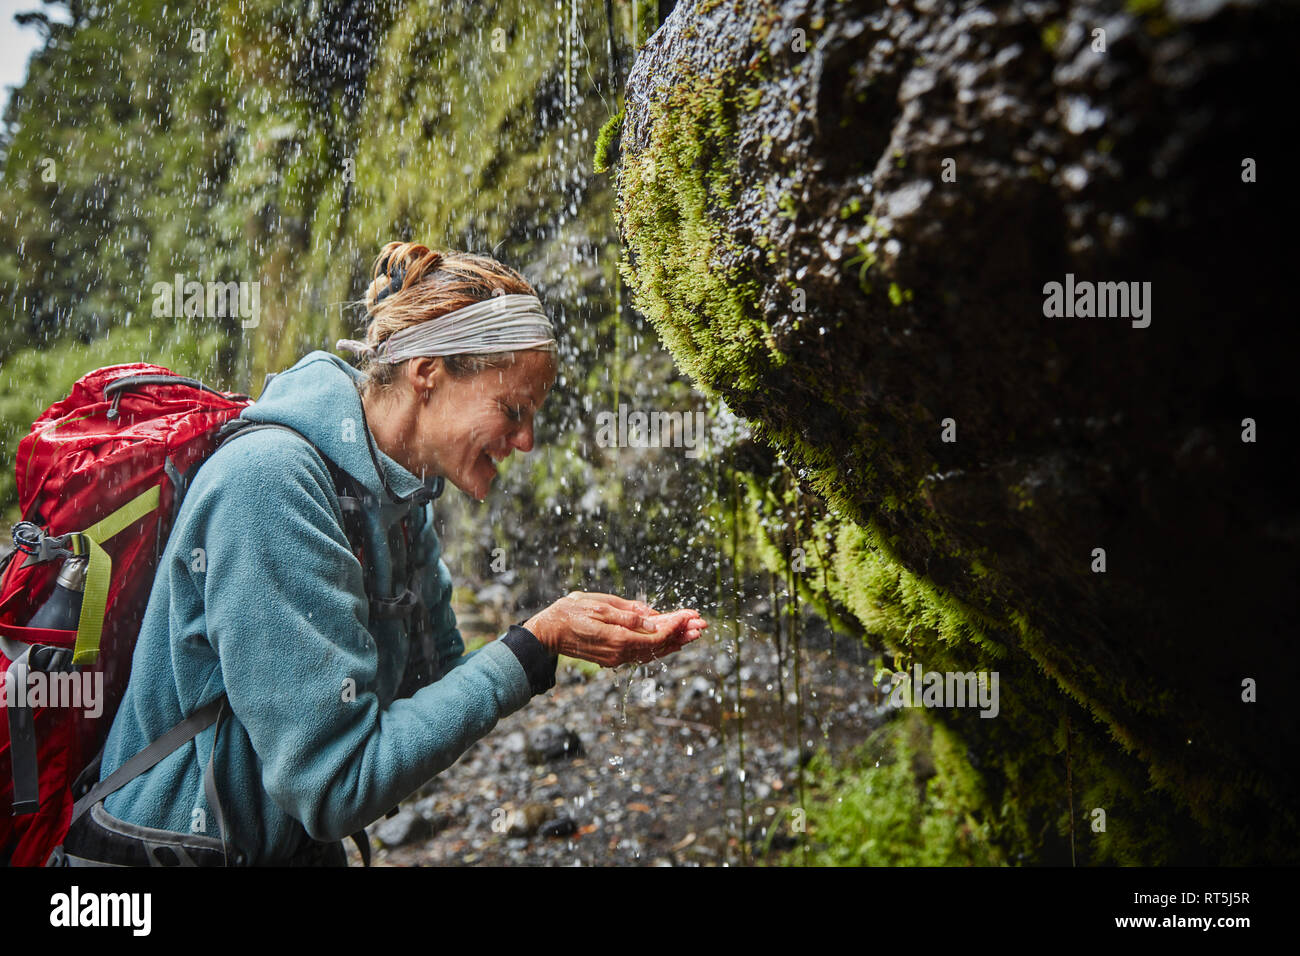 Chile, Patagonia, Osorno Volcano, woman refreshing with water from Las Cascadas waterfall Stock Photo